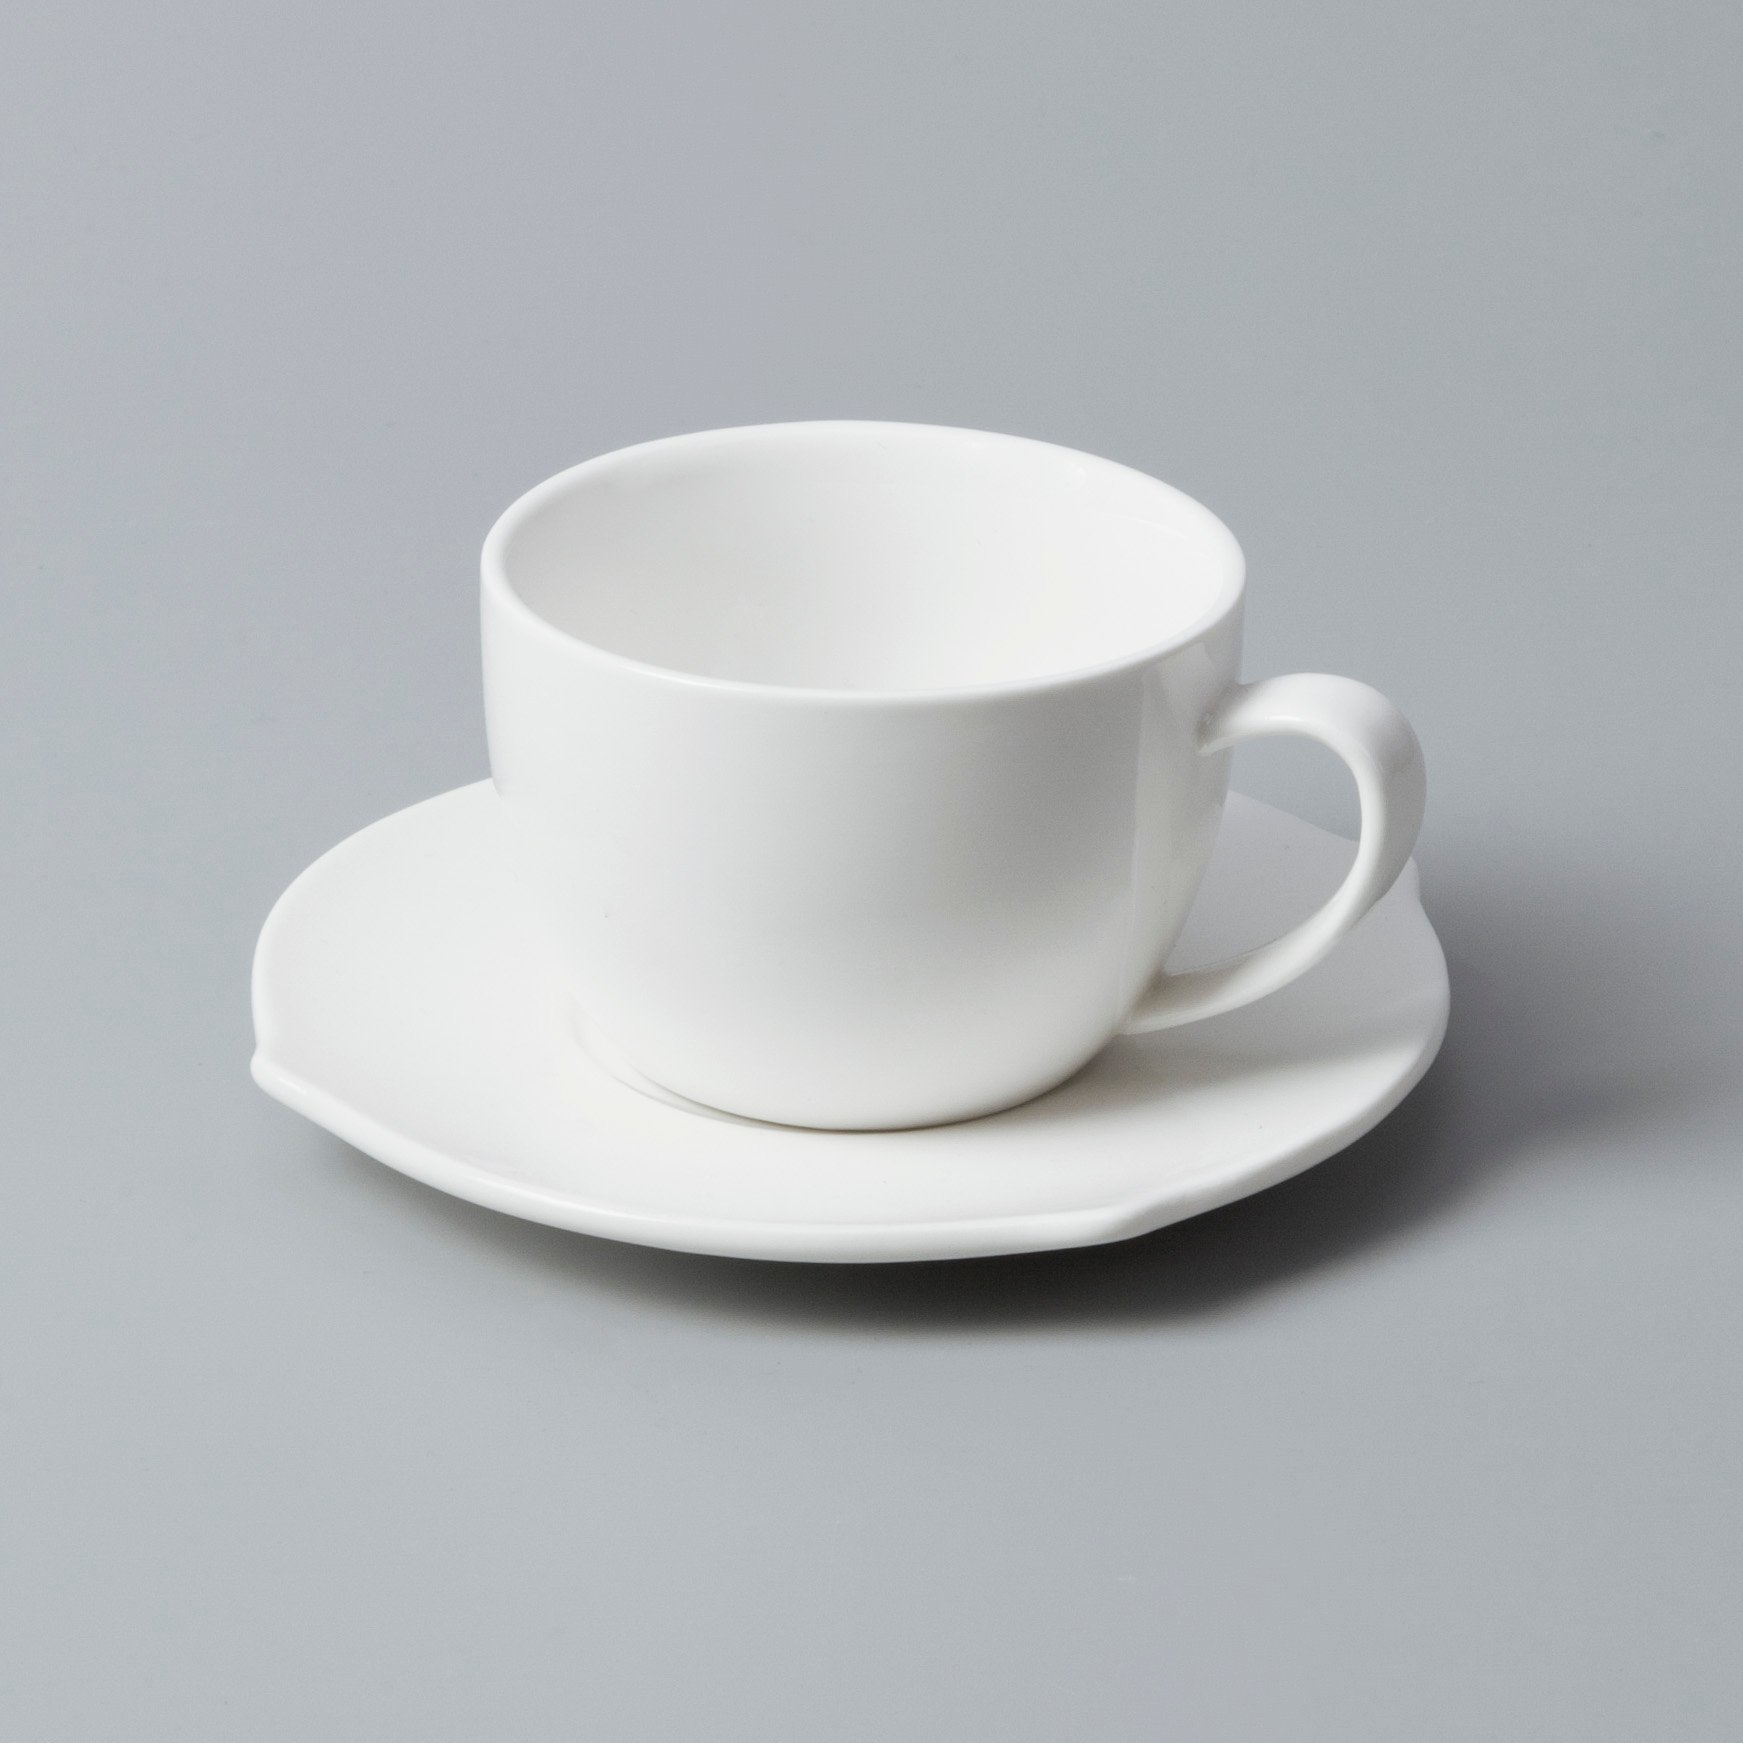 simply square white porcelain dinnerware set directly sale for dinning room